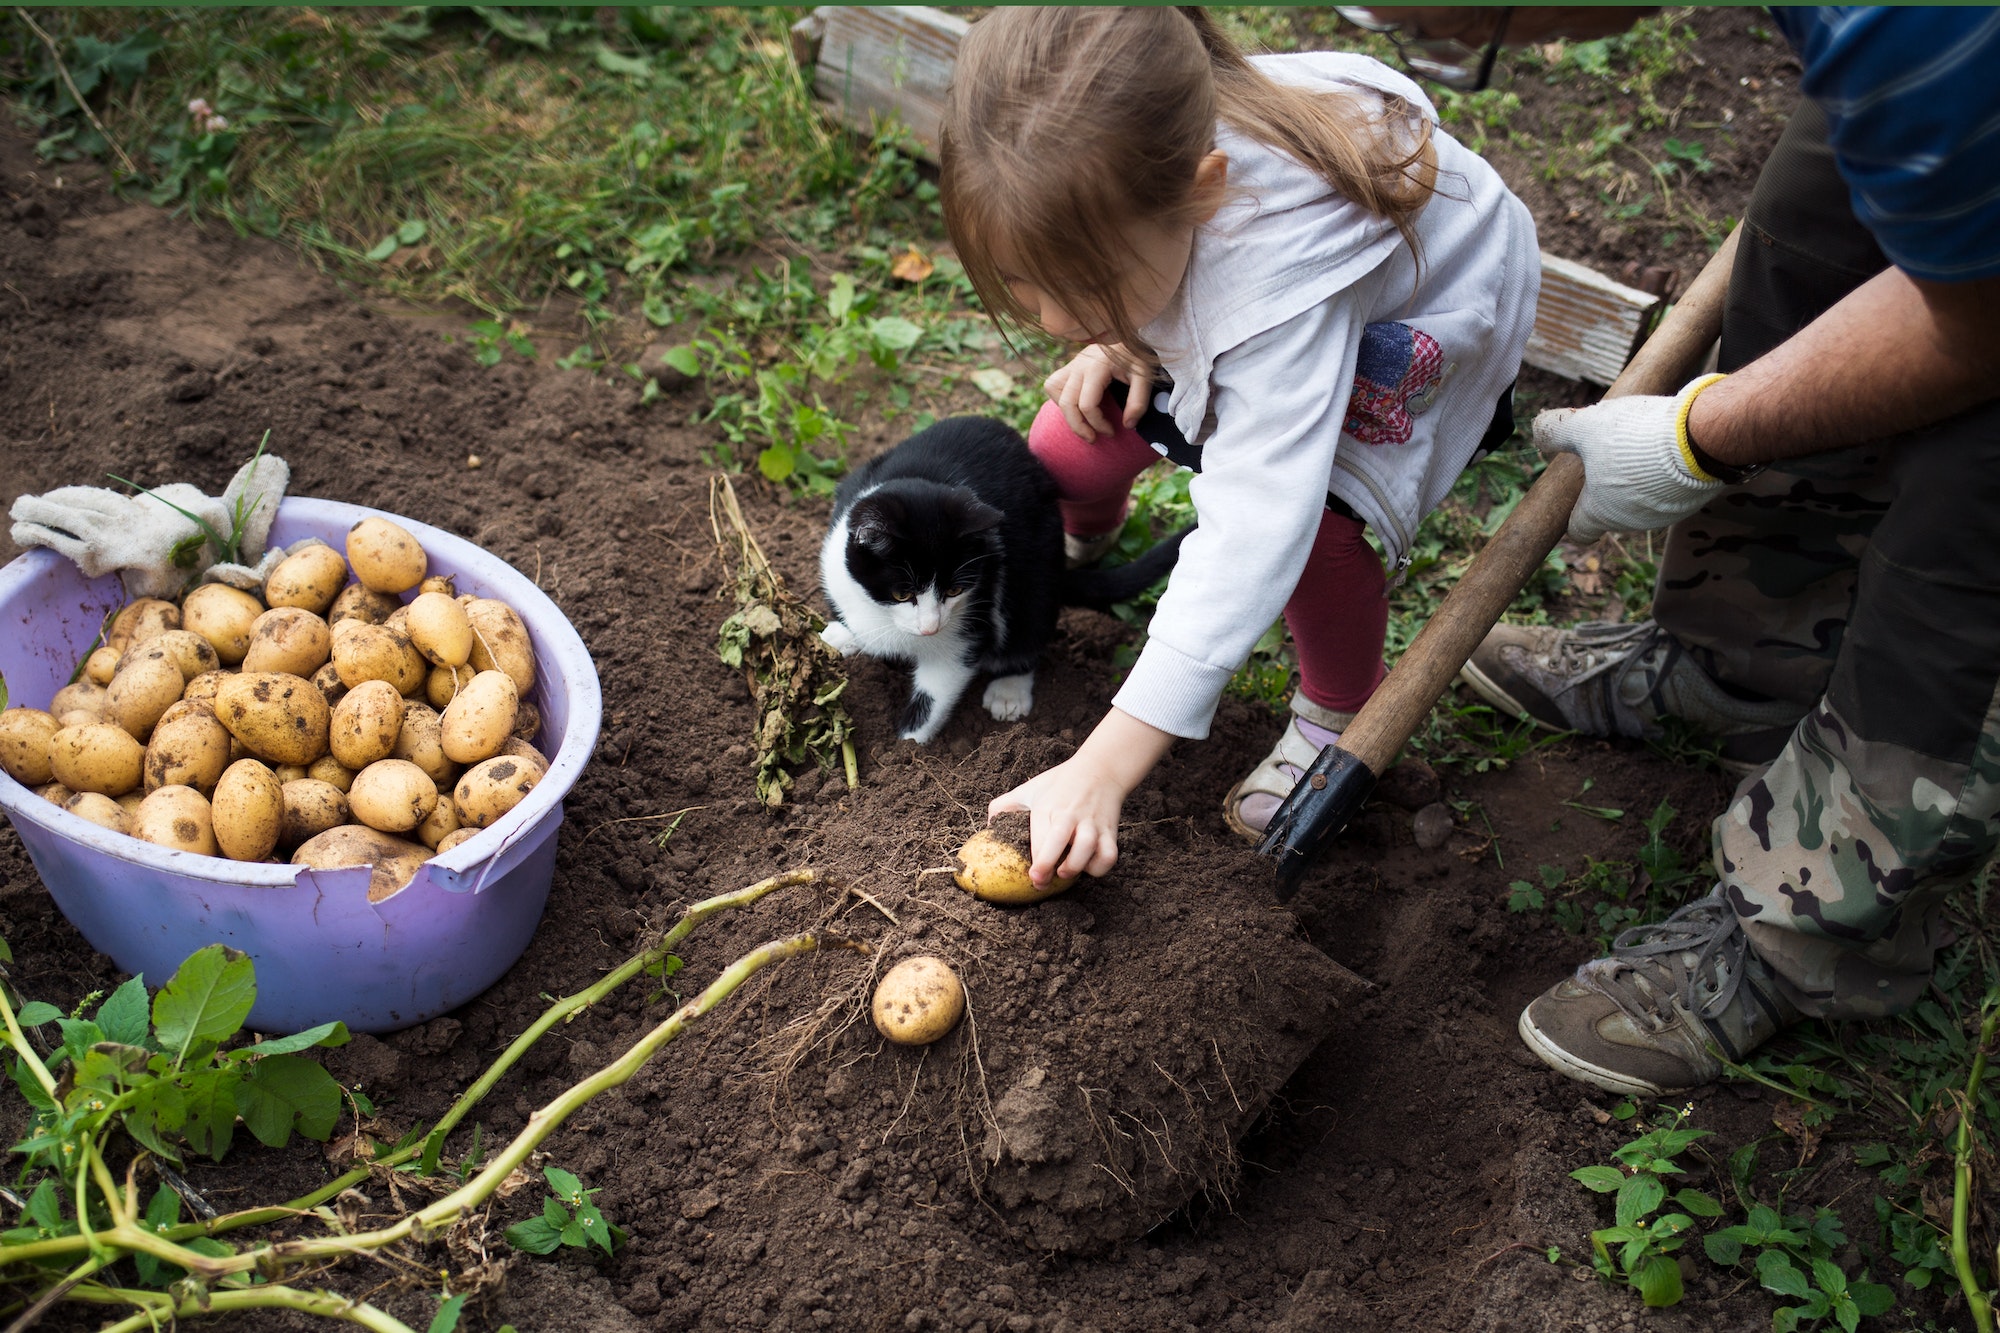 grandfather and granddaughter dig potatoes in their garden.